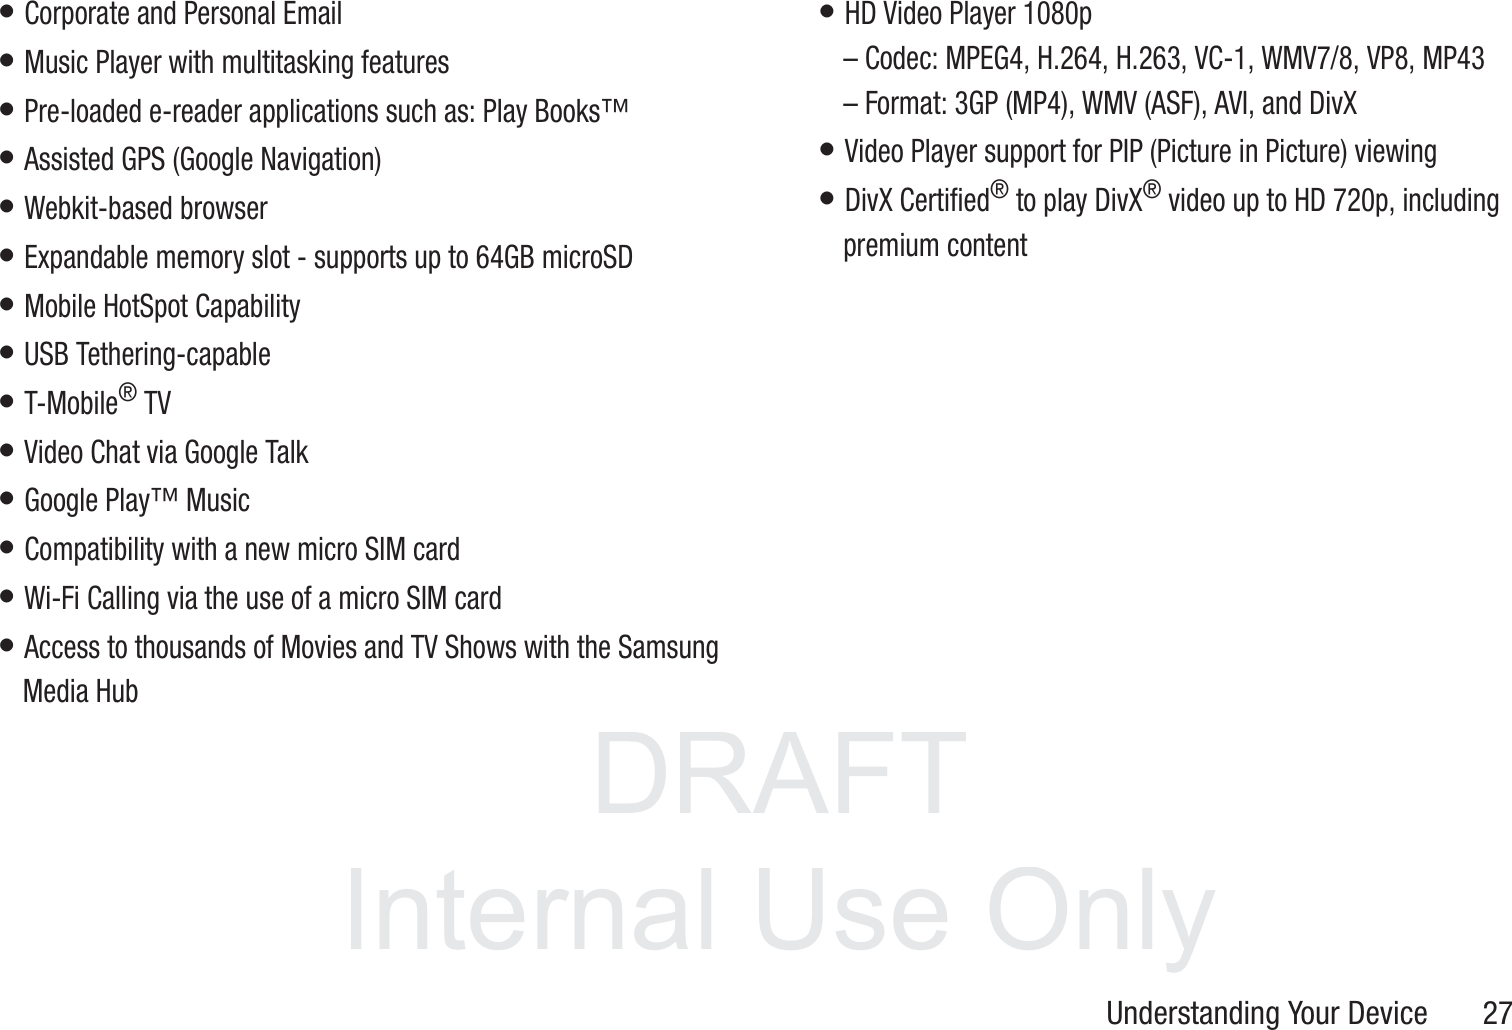 DRAFT InternalUse OnlyUnderstanding Your Device       27• Corporate and Personal Email• Music Player with multitasking features• Pre-loaded e-reader applications such as: Play Books™• Assisted GPS (Google Navigation)• Webkit-based browser• Expandable memory slot - supports up to 64GB microSD• Mobile HotSpot Capability• USB Tethering-capable• T-Mobile® TV• Video Chat via Google Talk• Google Play™ Music• Compatibility with a new micro SIM card• Wi-Fi Calling via the use of a micro SIM card• Access to thousands of Movies and TV Shows with the Samsung Media Hub• HD Video Player 1080p– Codec: MPEG4, H.264, H.263, VC-1, WMV7/8, VP8, MP43– Format: 3GP (MP4), WMV (ASF), AVI, and DivX • Video Player support for PIP (Picture in Picture) viewing• DivX Certified® to play DivX® video up to HD 720p, including premium content